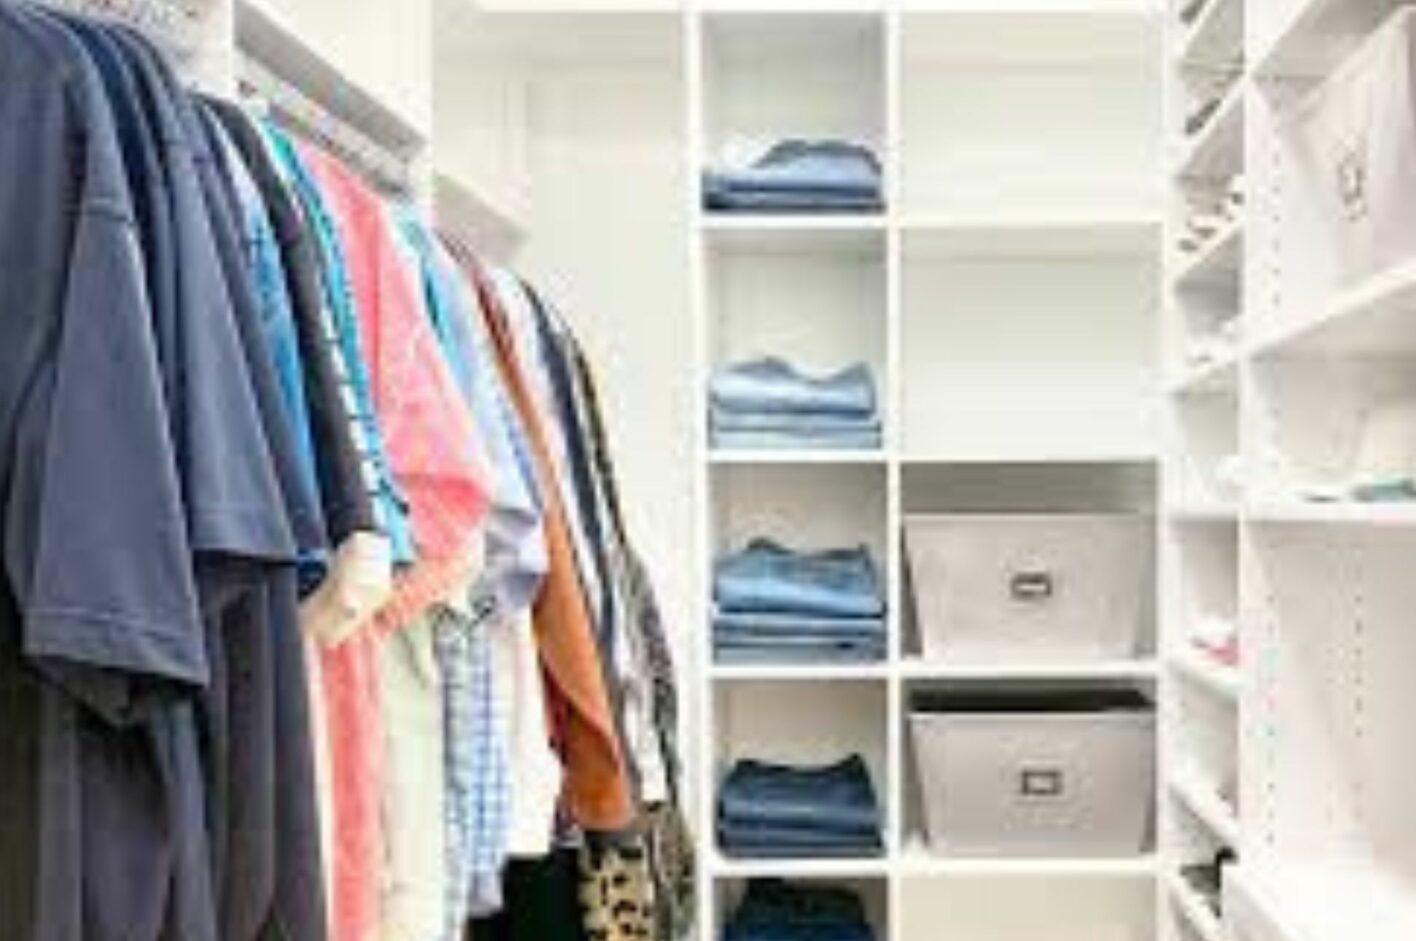  Become an expert in UPF clothing working with what is in your closet.  An image of the inside of a closet with shirts hanging.